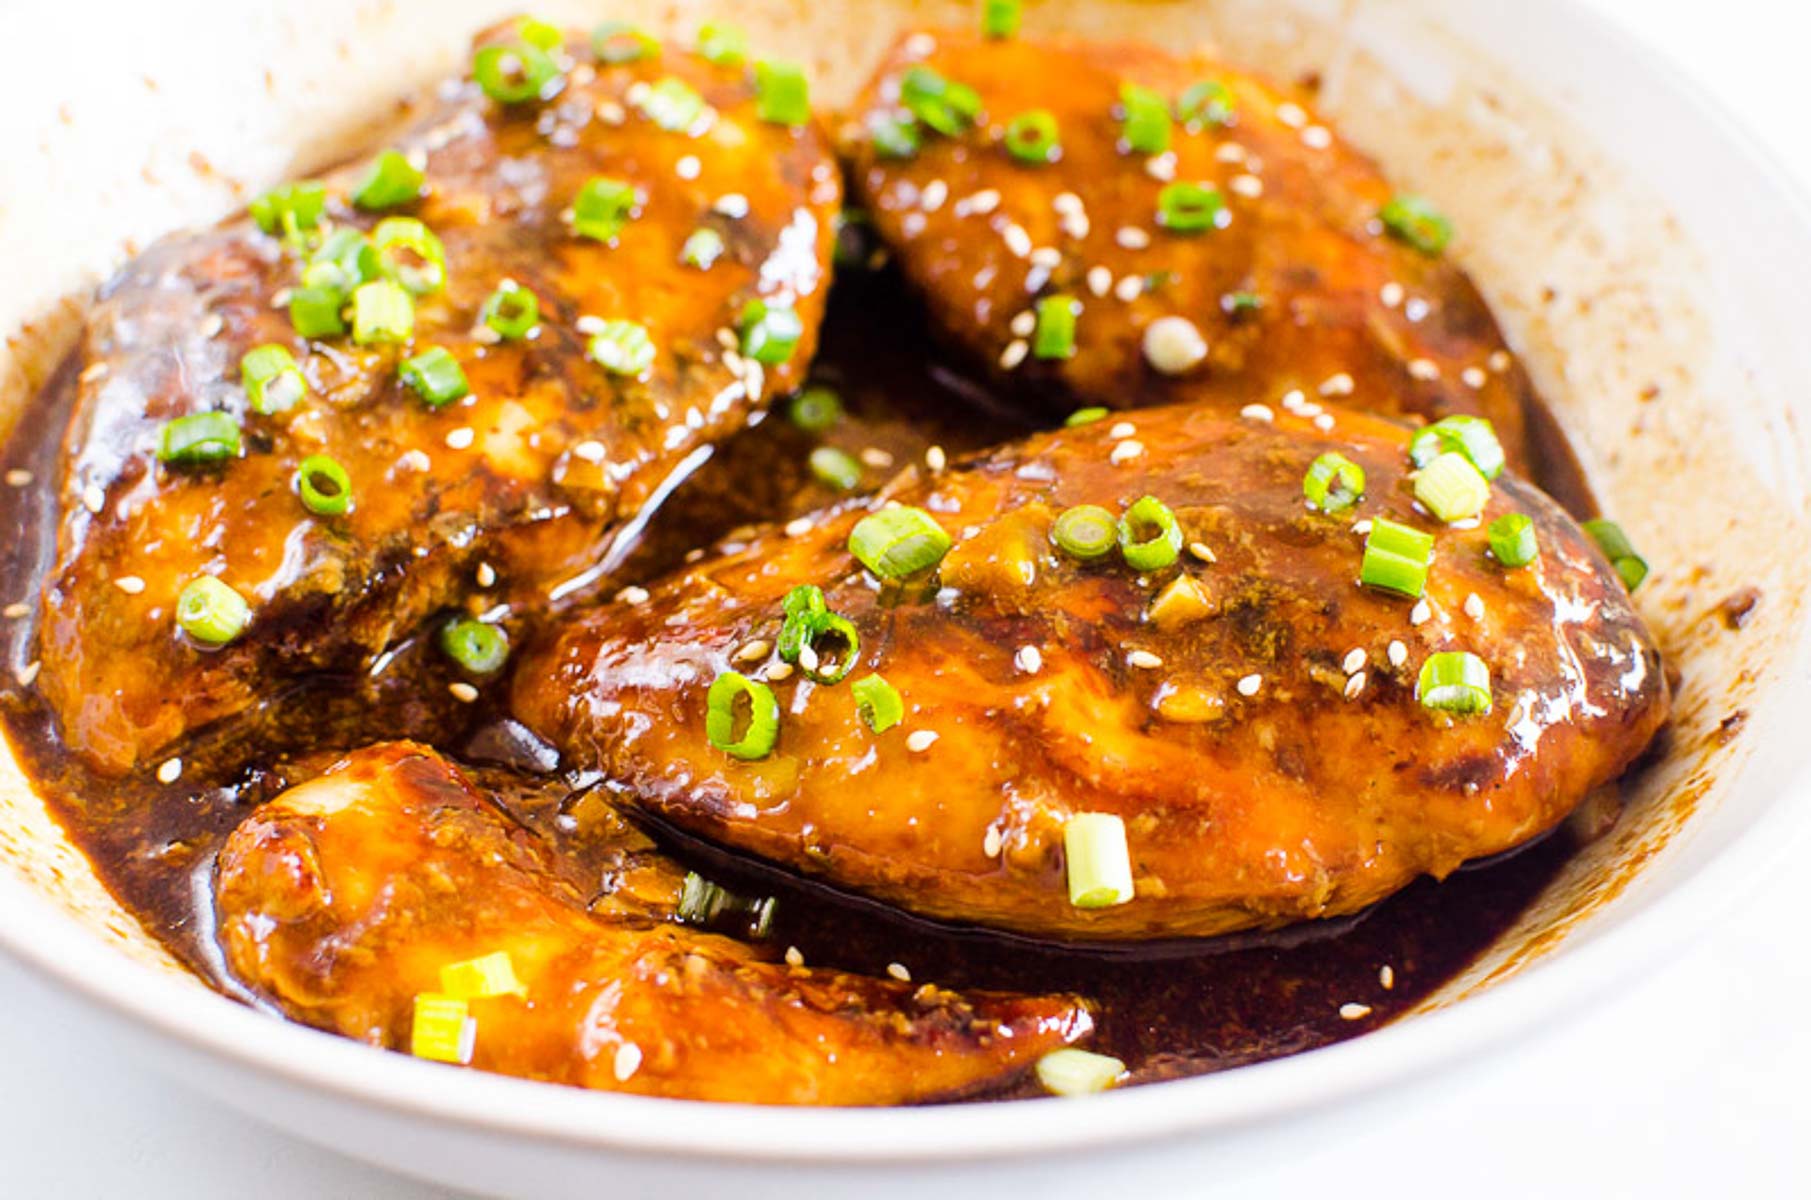 Chicken with sauce and green onion and sesame seed garnish in baking dish.